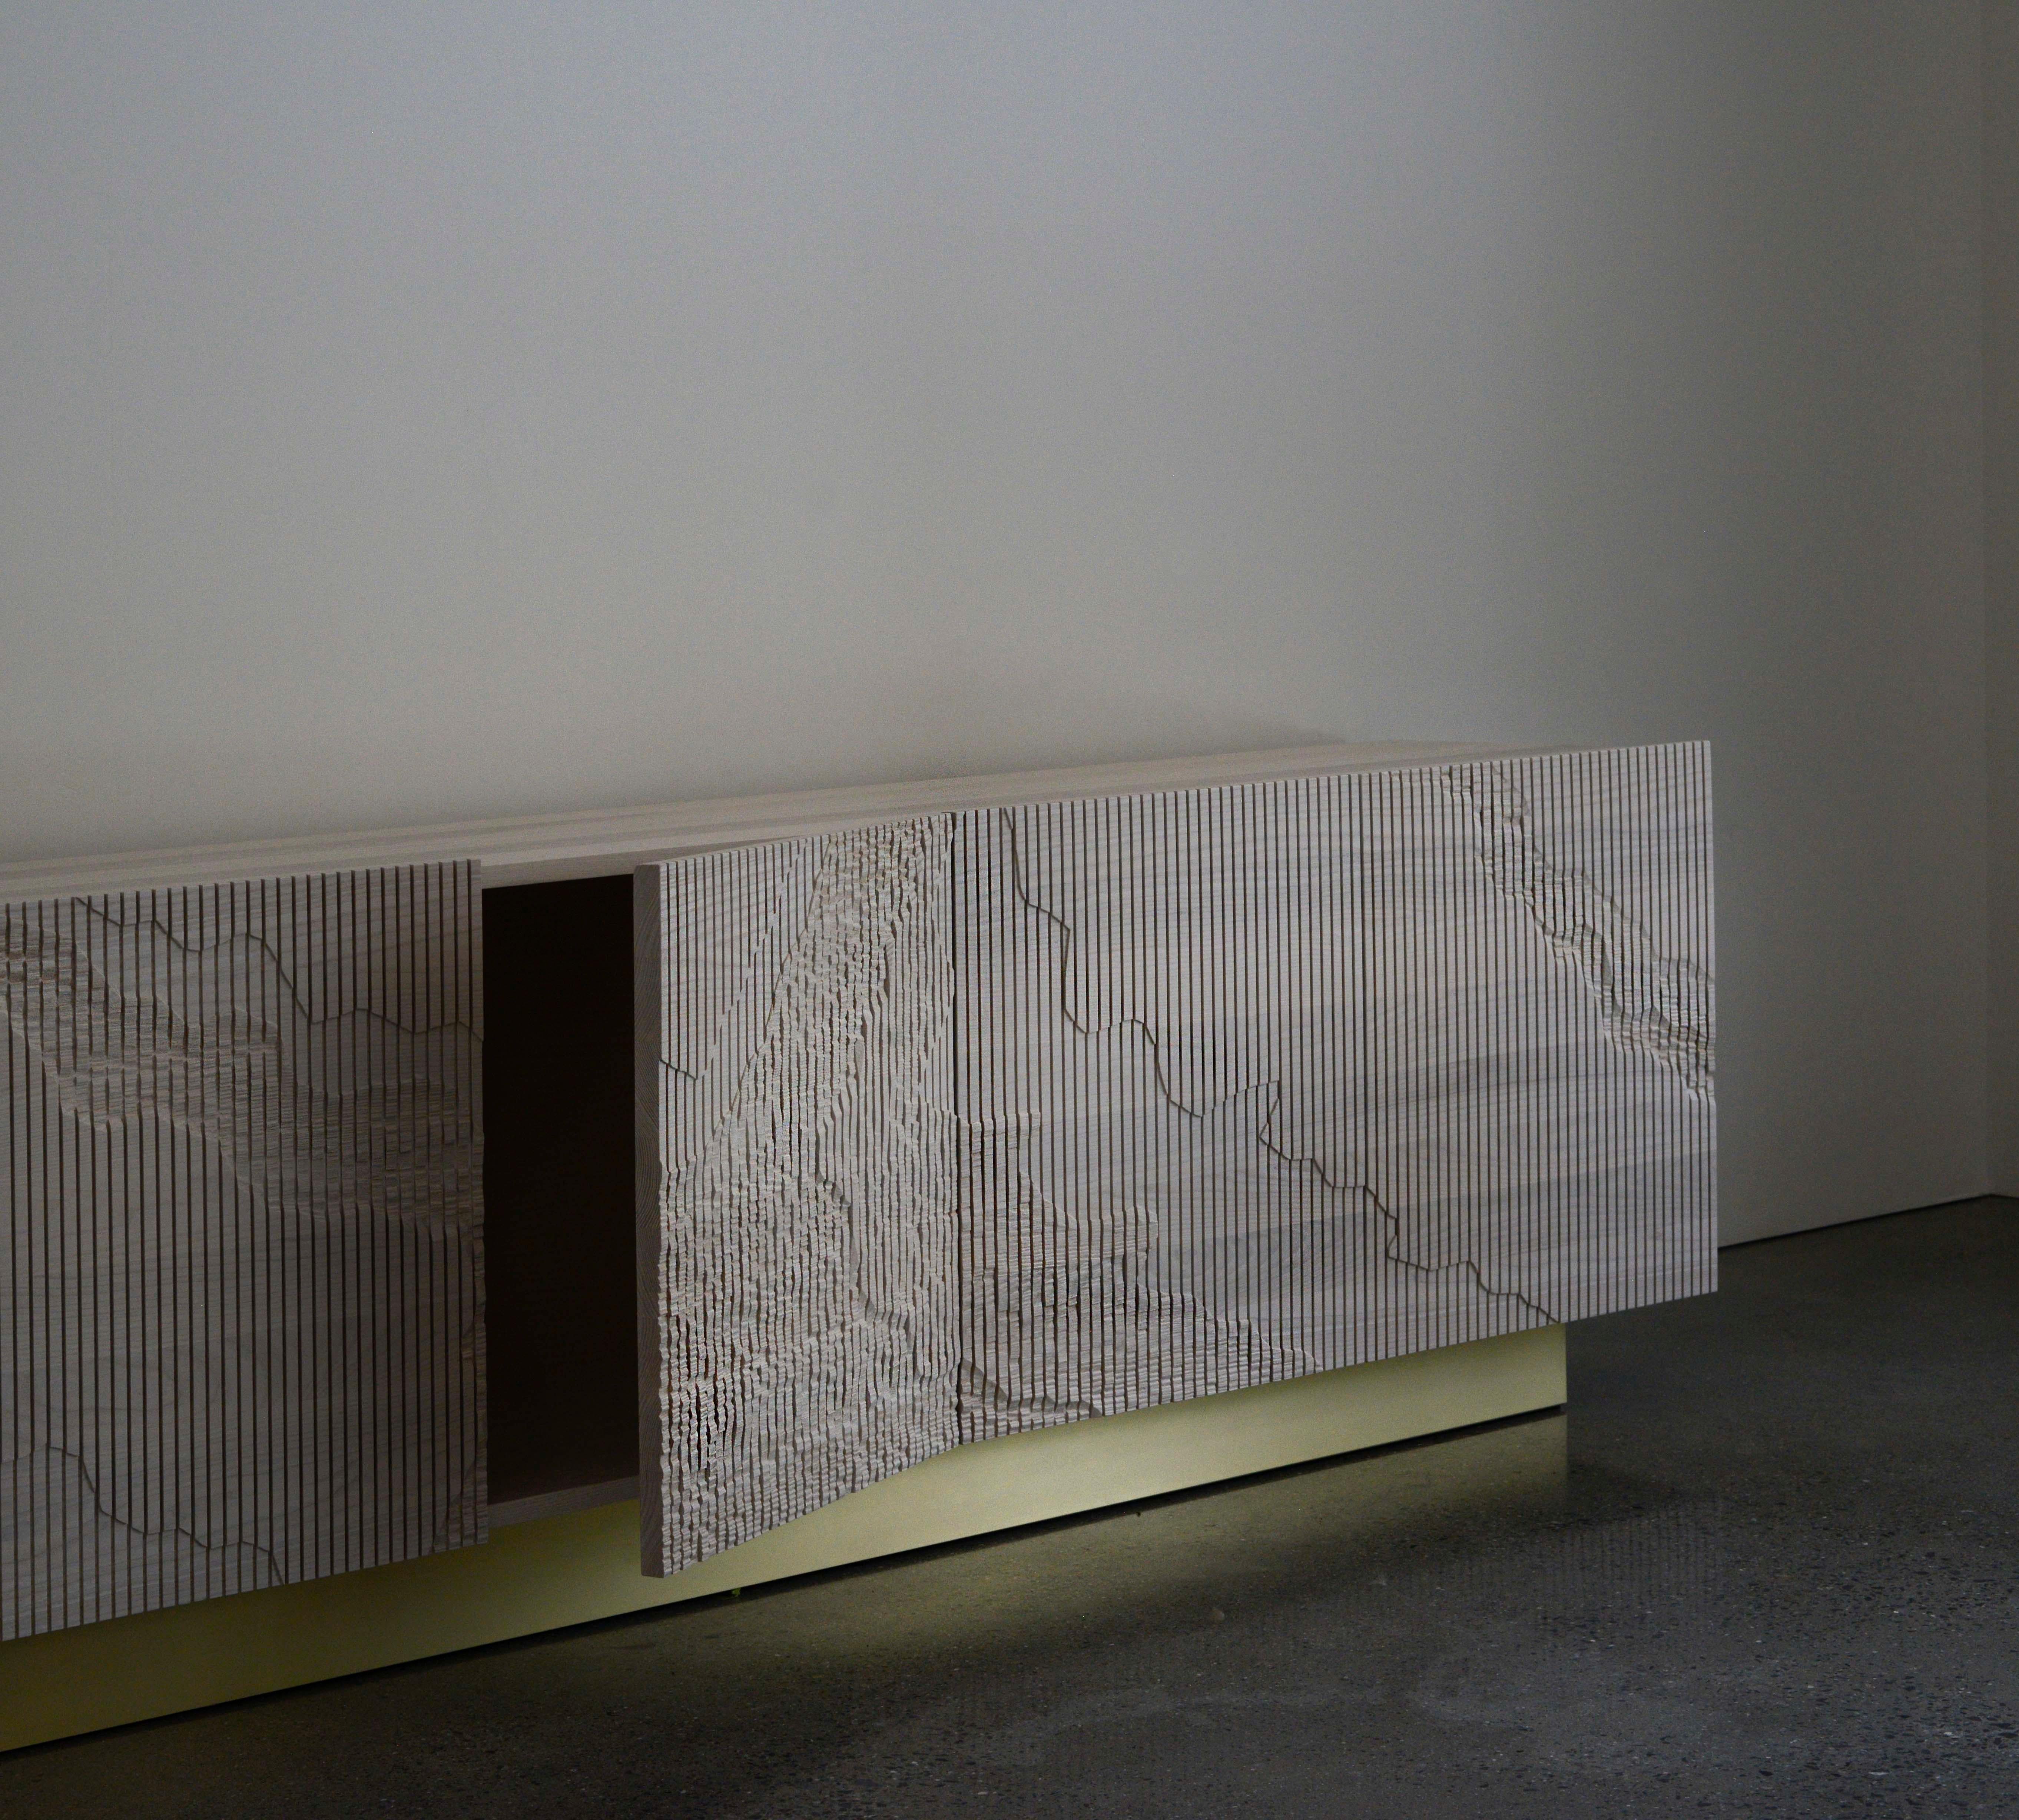 Both monumental and subtle, the Shale Credenza brings the intricacies of nature’s geology indoors. The wood doors are scored vertically across the grain, and details of a cliff’s facade, mapped out by Simon Johns, are carved into them by hand